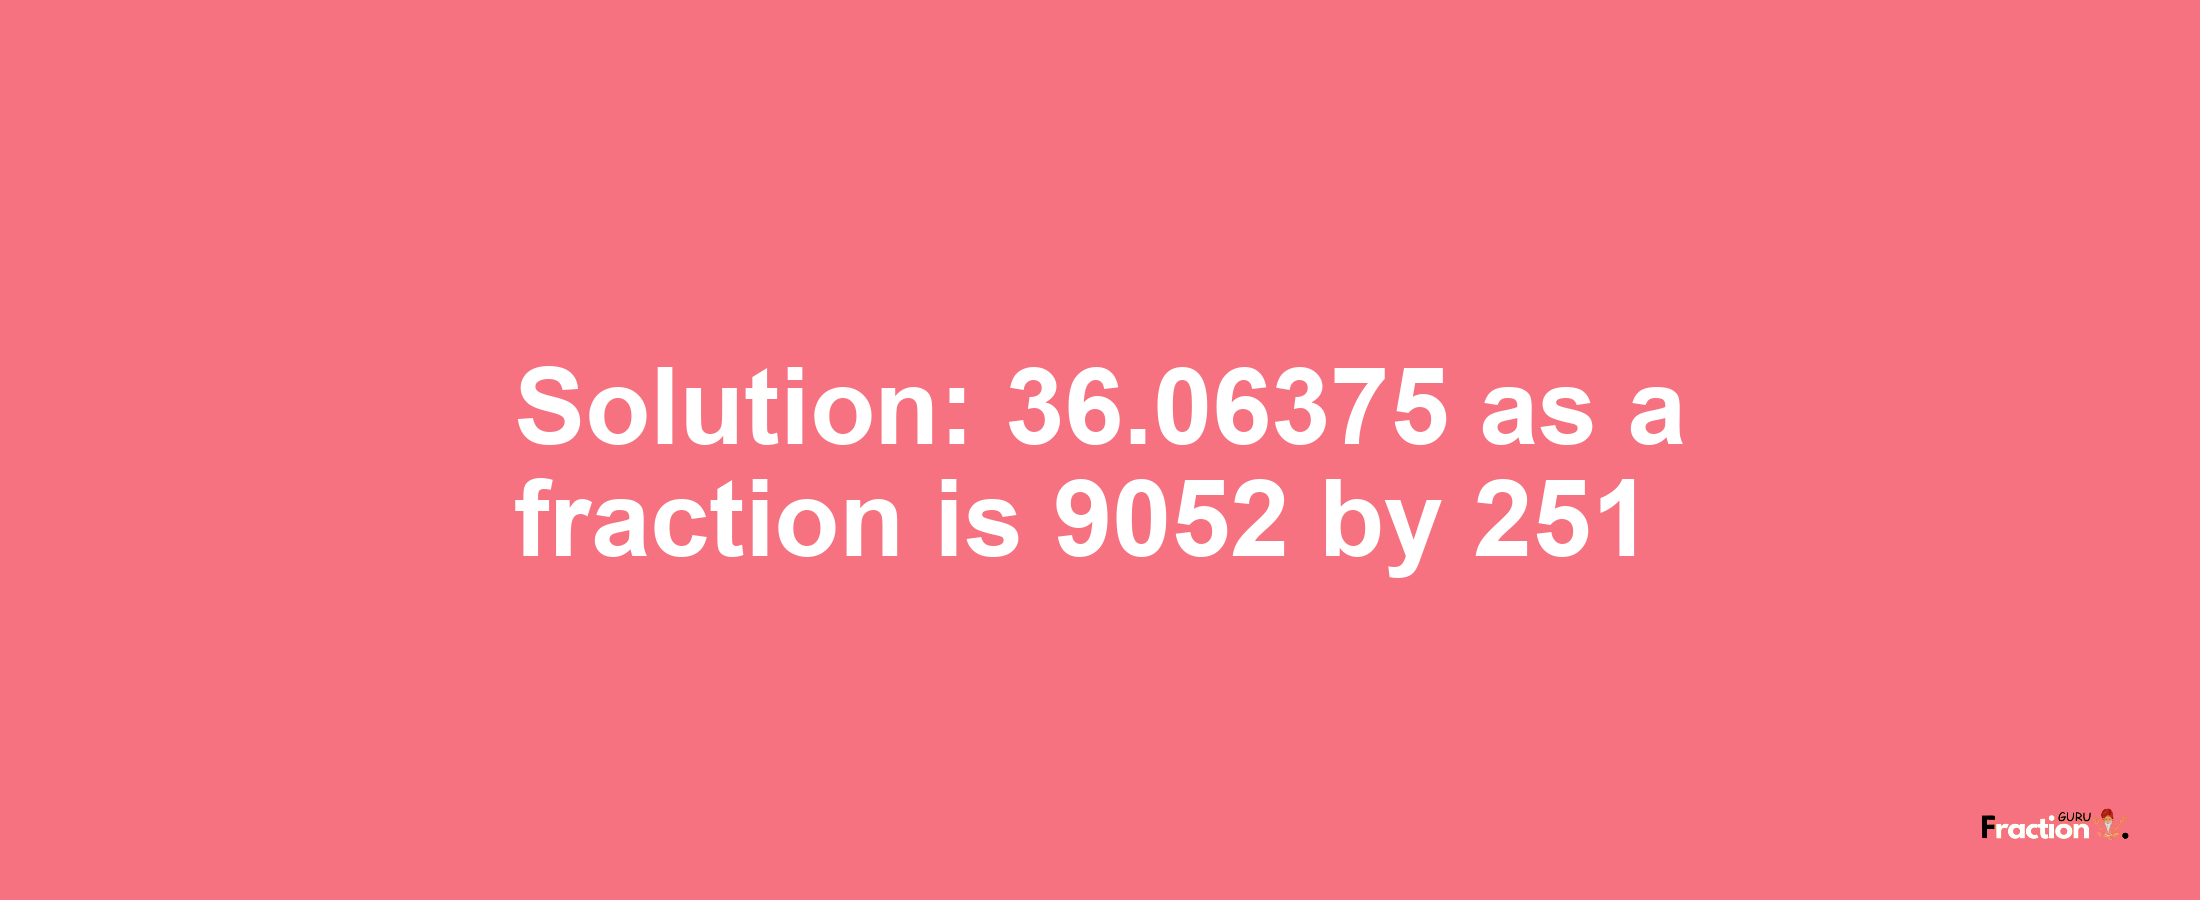 Solution:36.06375 as a fraction is 9052/251